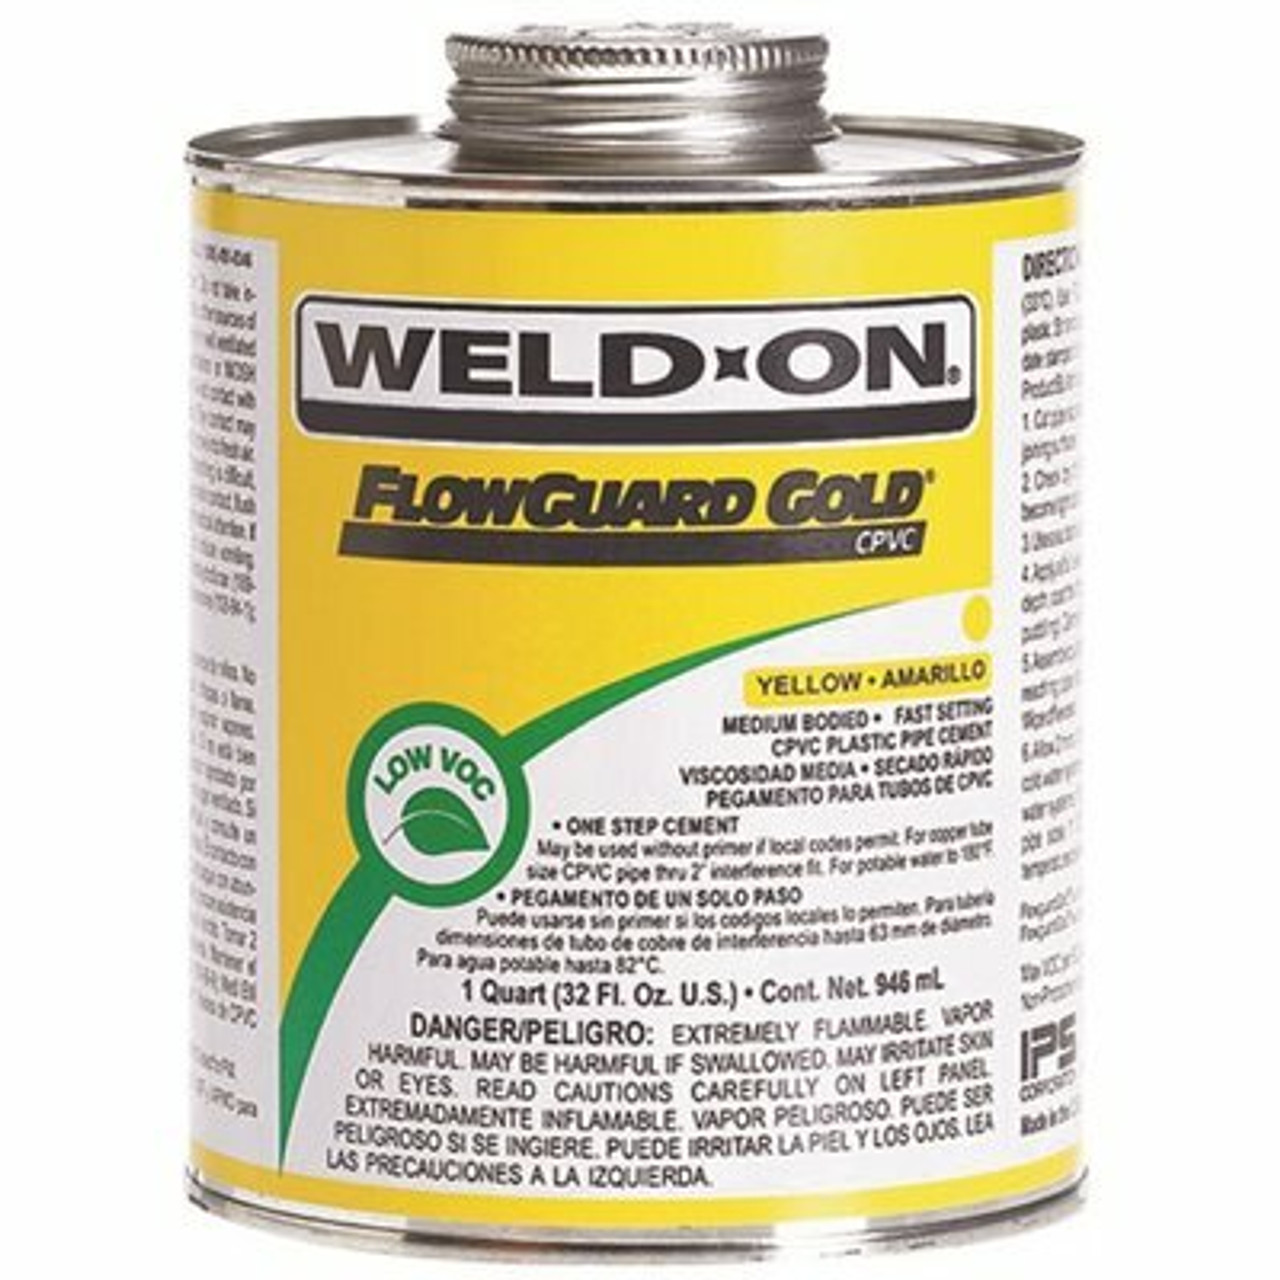 Weld-On 16 Oz. Flow Guard Cpvc Low Voc Cement In Yellow